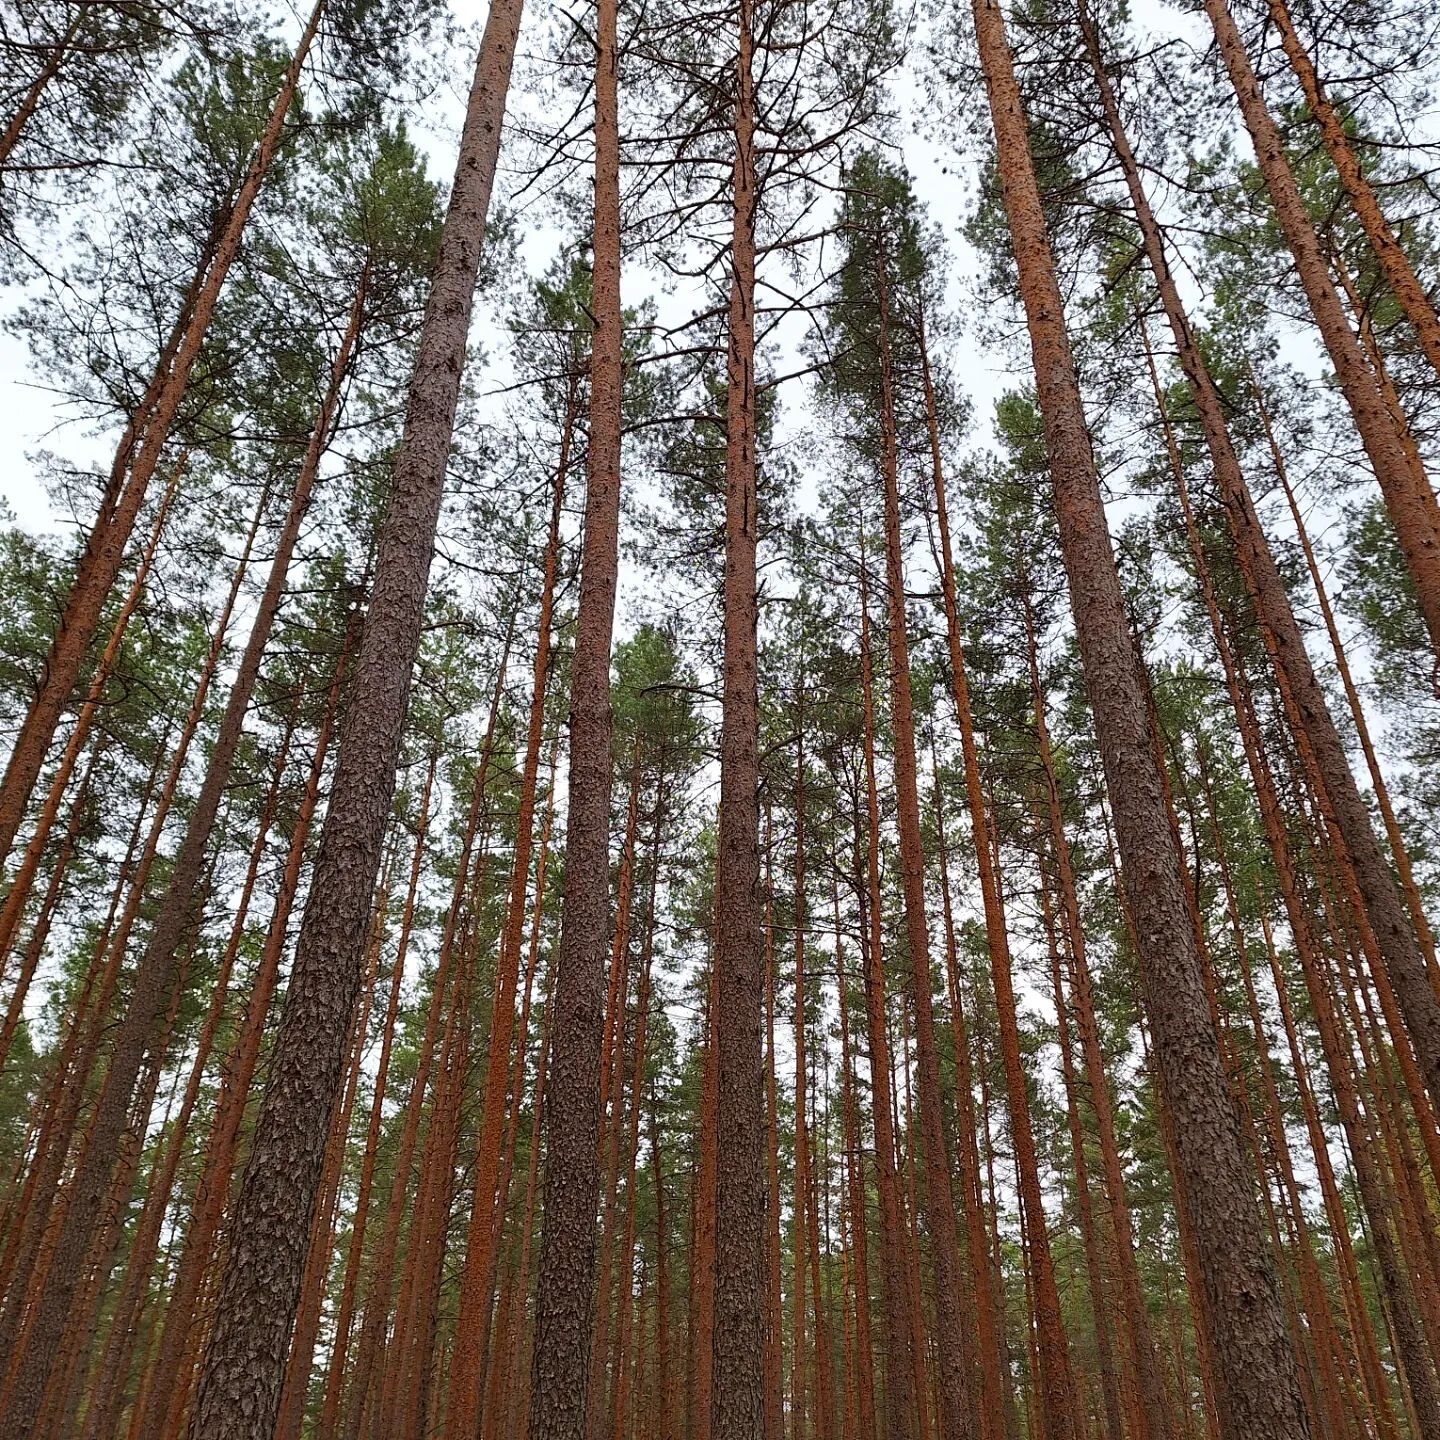 💚☘️ taking time to enjoy the beautiful nature while walking in the woods. ☘️ Love these tall pines! 💚💚
#guidingvitality #vitalitycoach #naturelovers #naturetherapy #mindful #balance #walk #woods #vitality #estonia